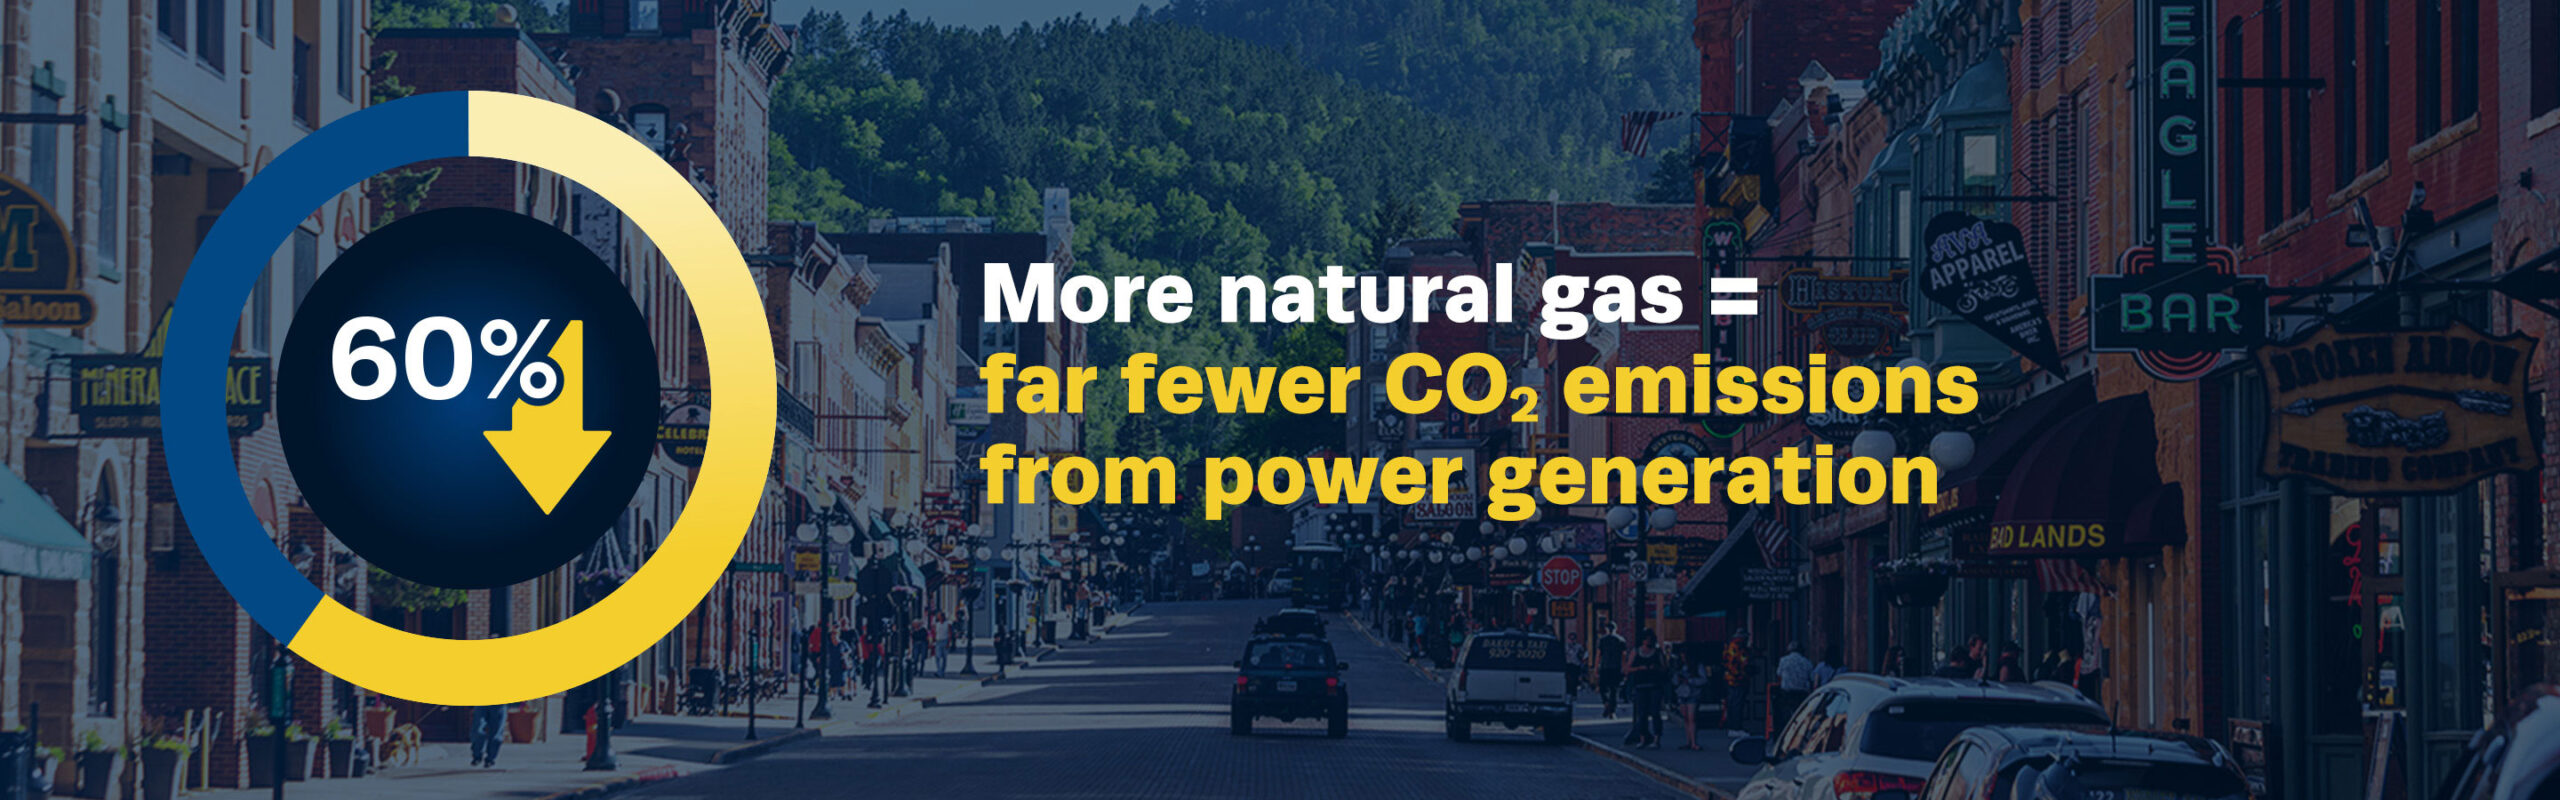 More natural gas = 60%  far fewer CO2 emissions from power generation